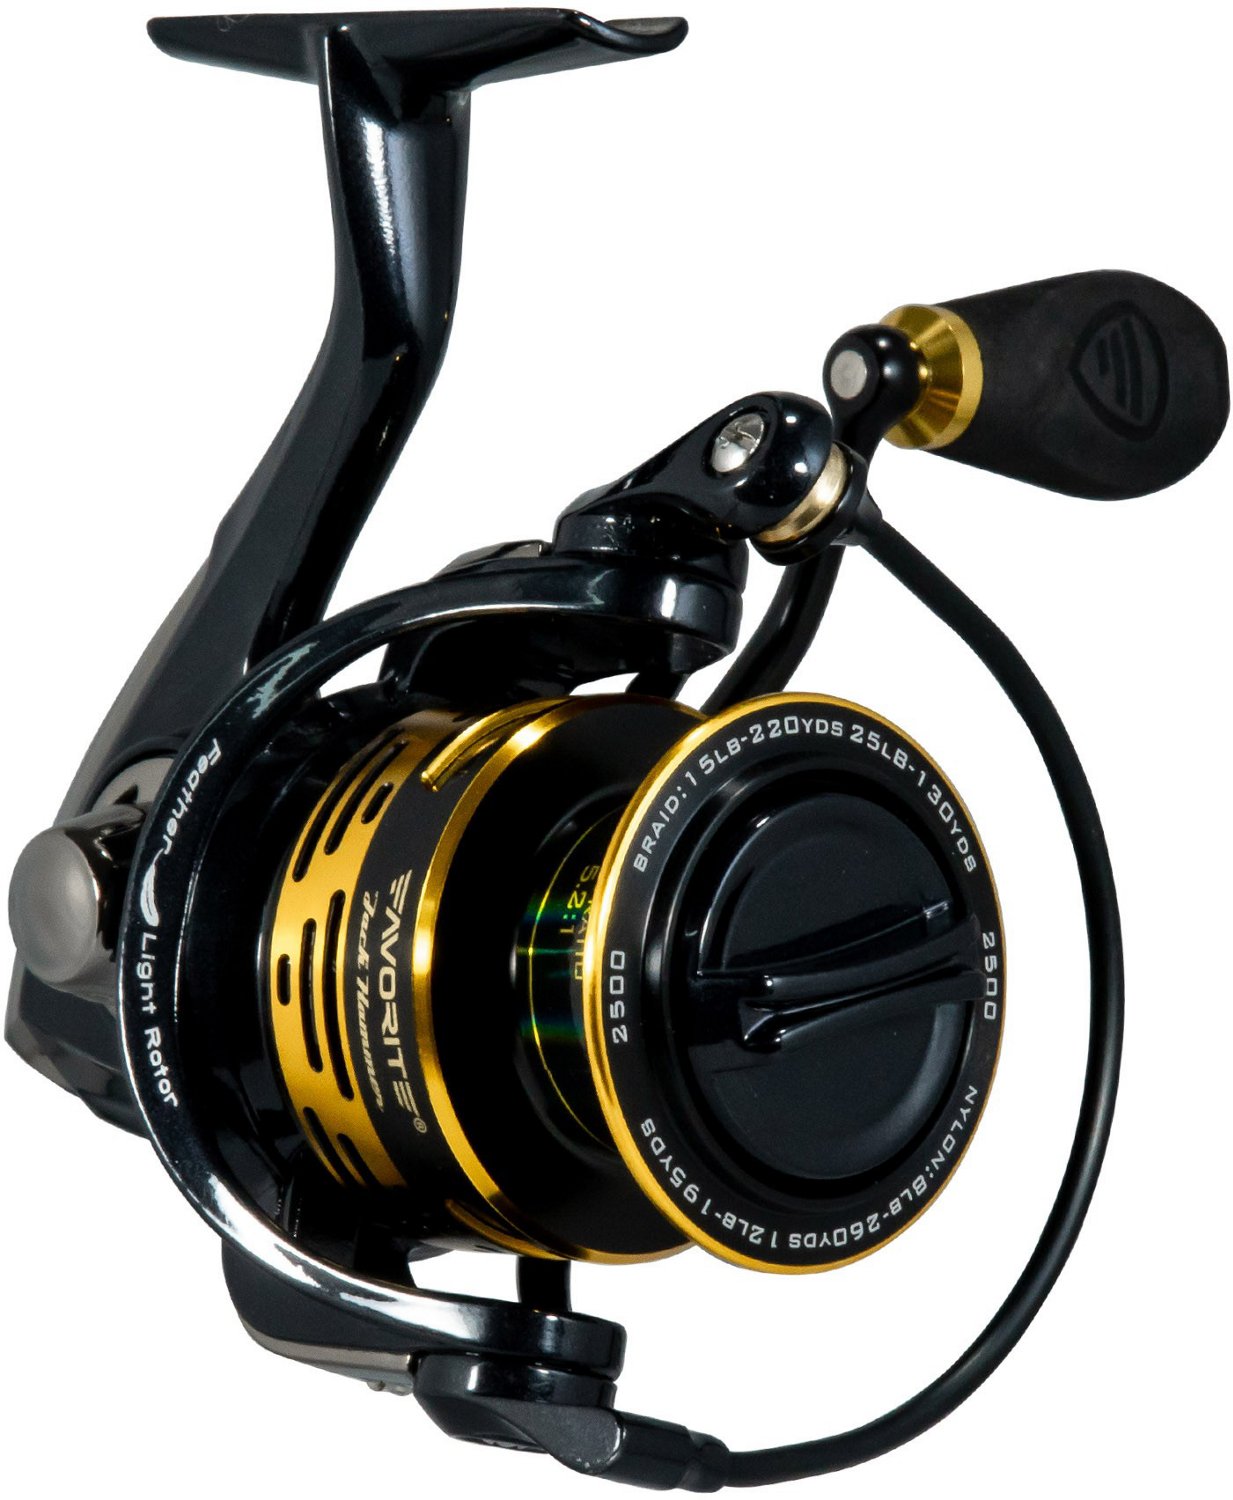 Academy Sports + Outdoors Favorite Fishing Jack Hammer Spinning Reel